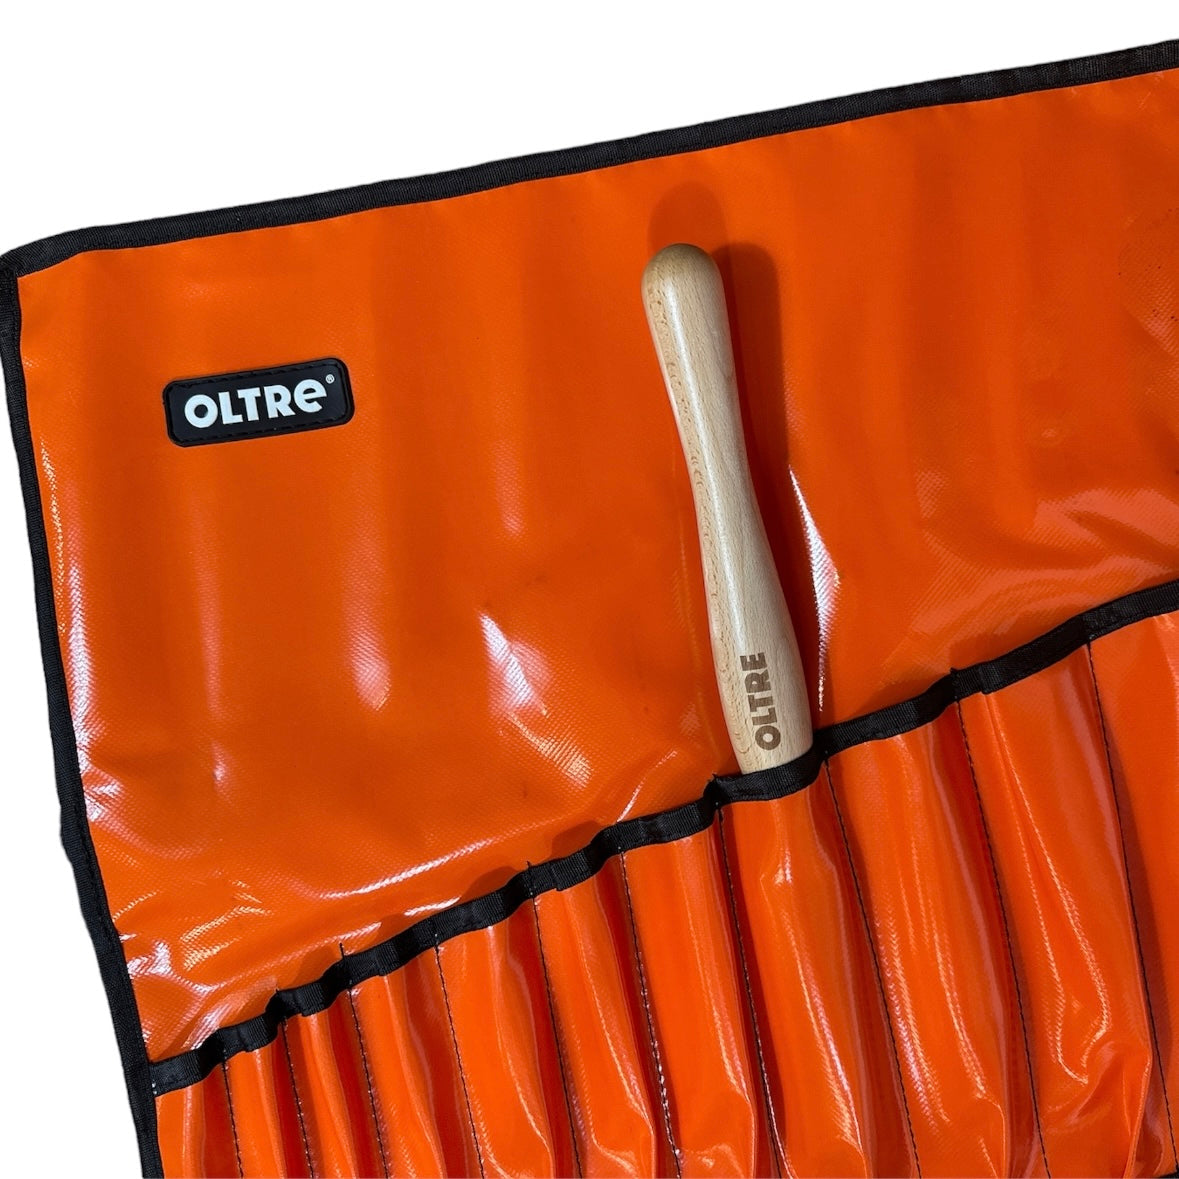 Tool Roll Weather Resistant 13 Pocket by Oltre